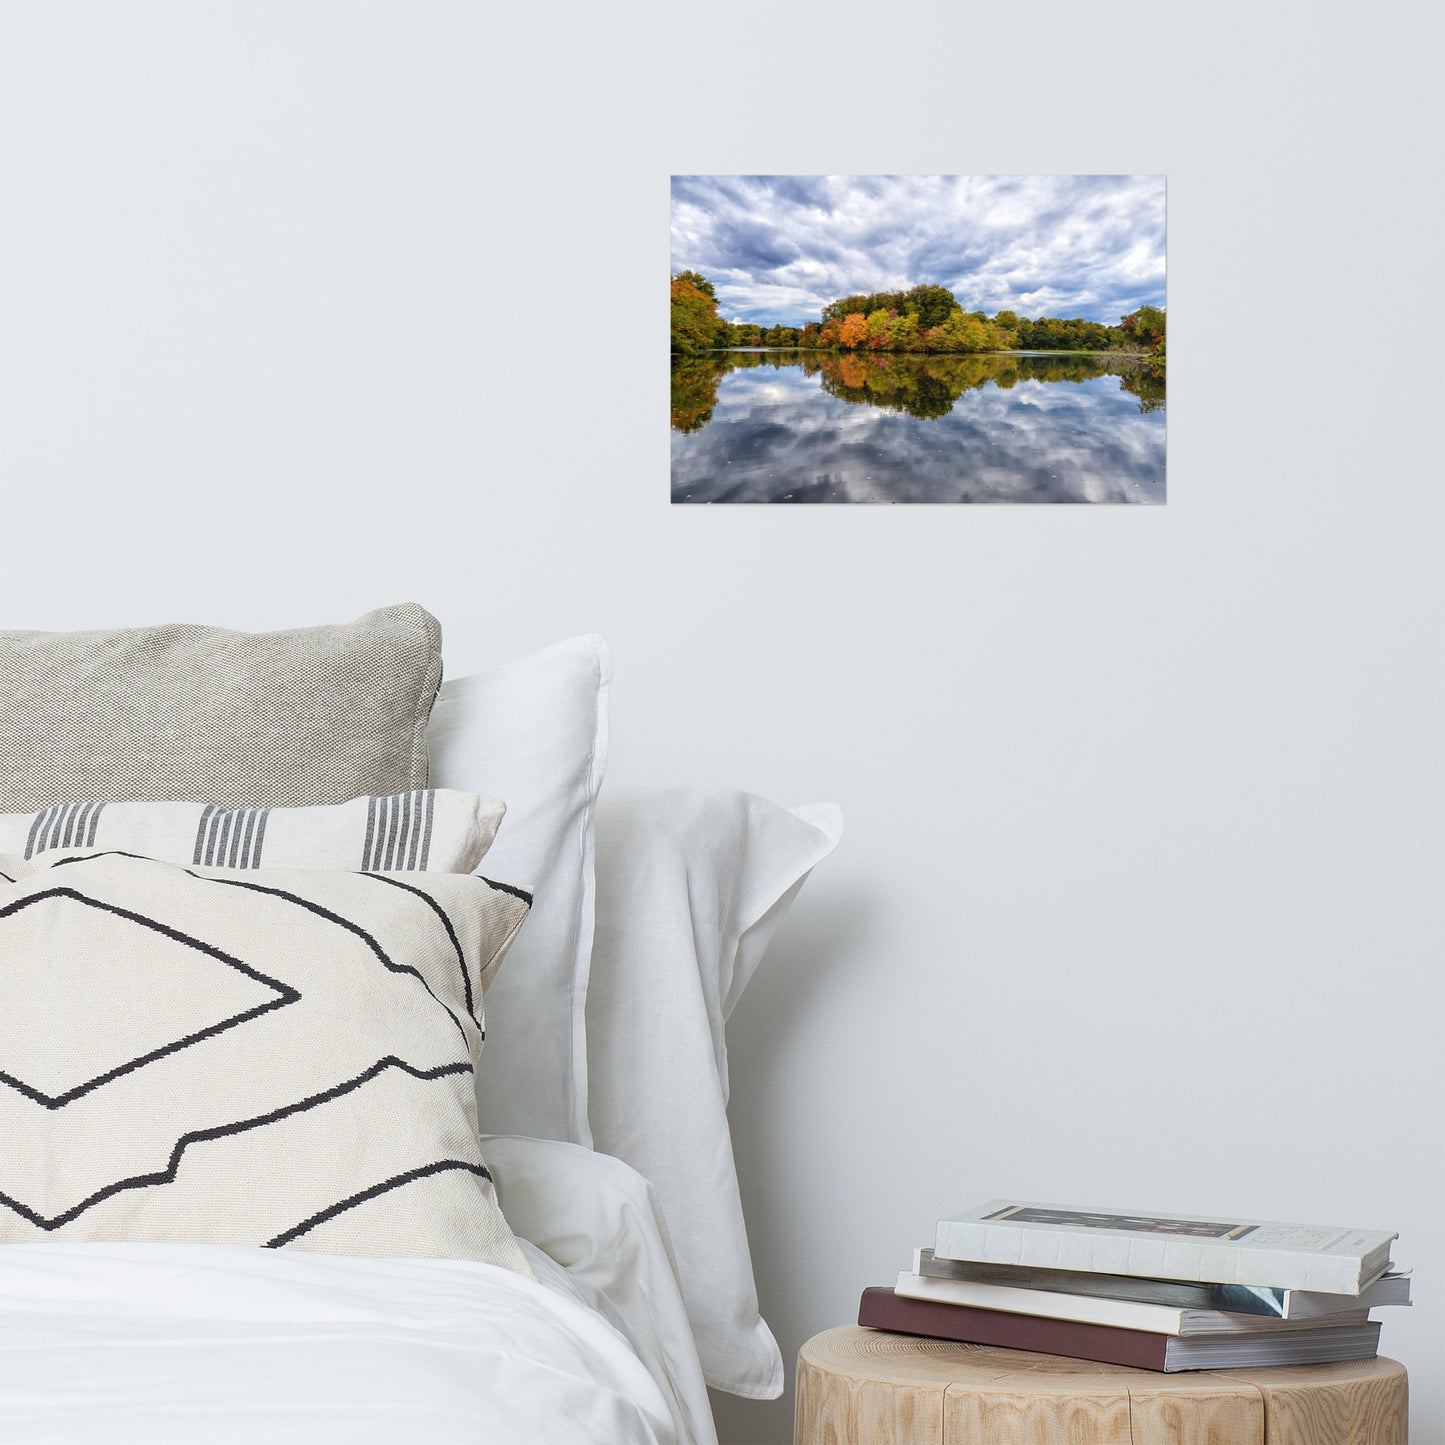 Simple Wall Decor For Bedroom: Fall Trees on Edge of Pond With Stormy Sky - Rustic / Rural / Country Style Landscape / Nature Loose / Unframed / Frameless / Frameable Photograph Wall Art Print - Artwork